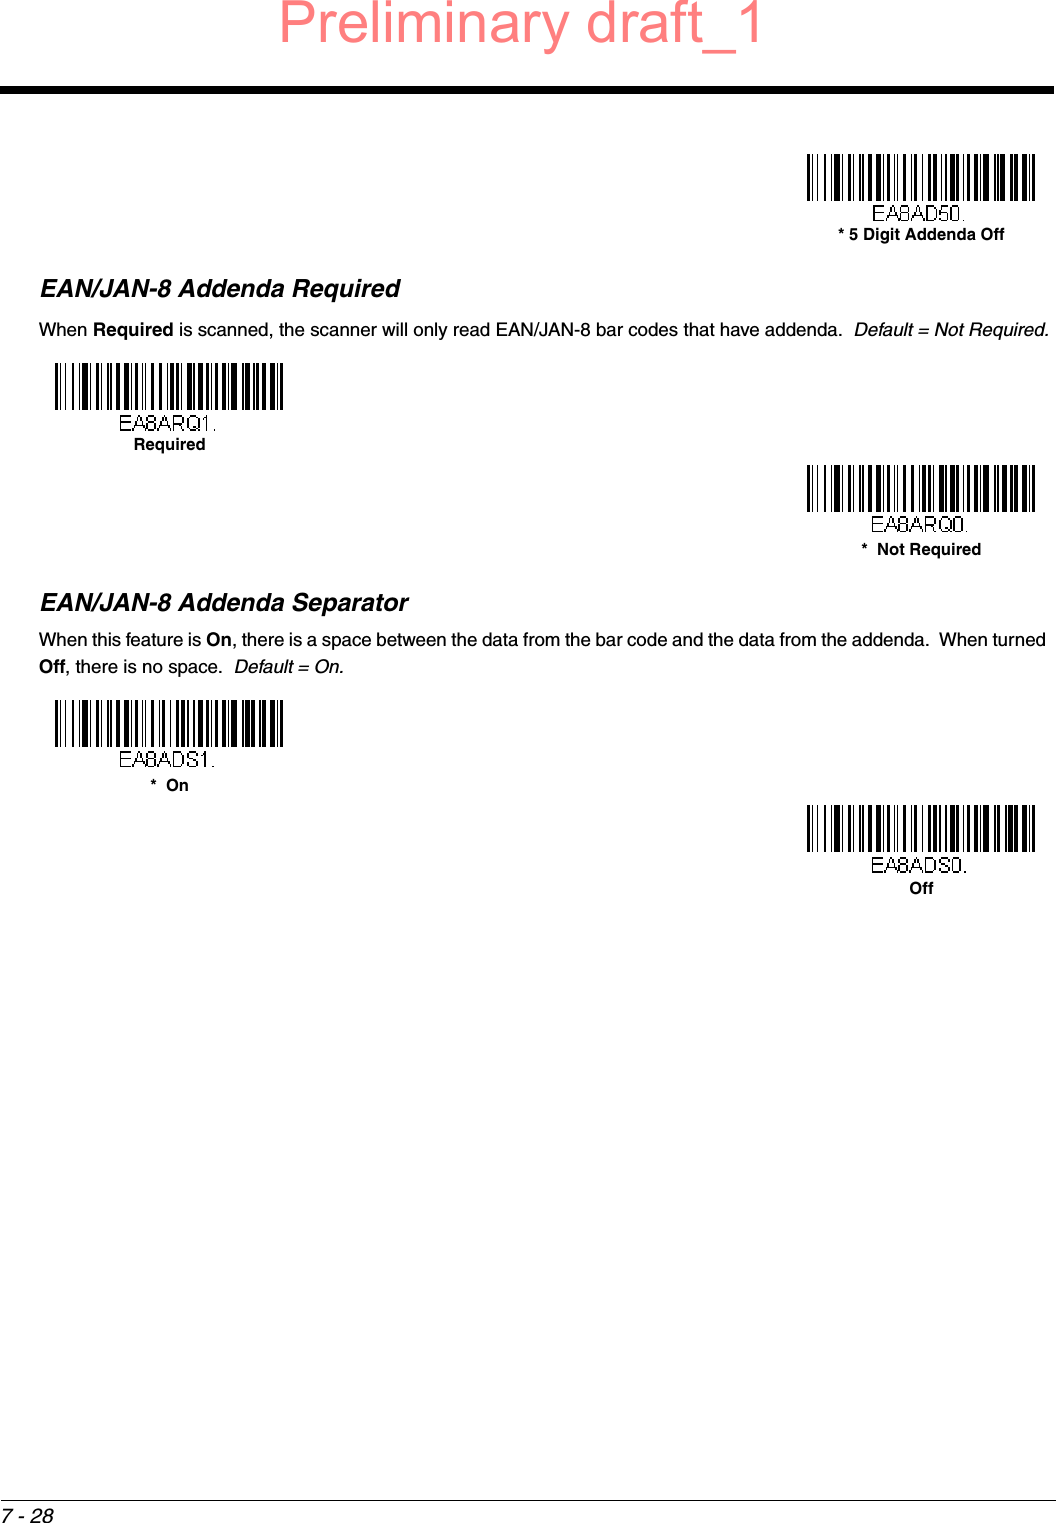 7 - 28EAN/JAN-8 Addenda RequiredWhen Required is scanned, the scanner will only read EAN/JAN-8 bar codes that have addenda.  Default = Not Required.EAN/JAN-8 Addenda SeparatorWhen this feature is On, there is a space between the data from the bar code and the data from the addenda.  When turned Off, there is no space.  Default = On.* 5 Digit Addenda OffRequired*  Not Required*  OnOffPreliminary draft_1